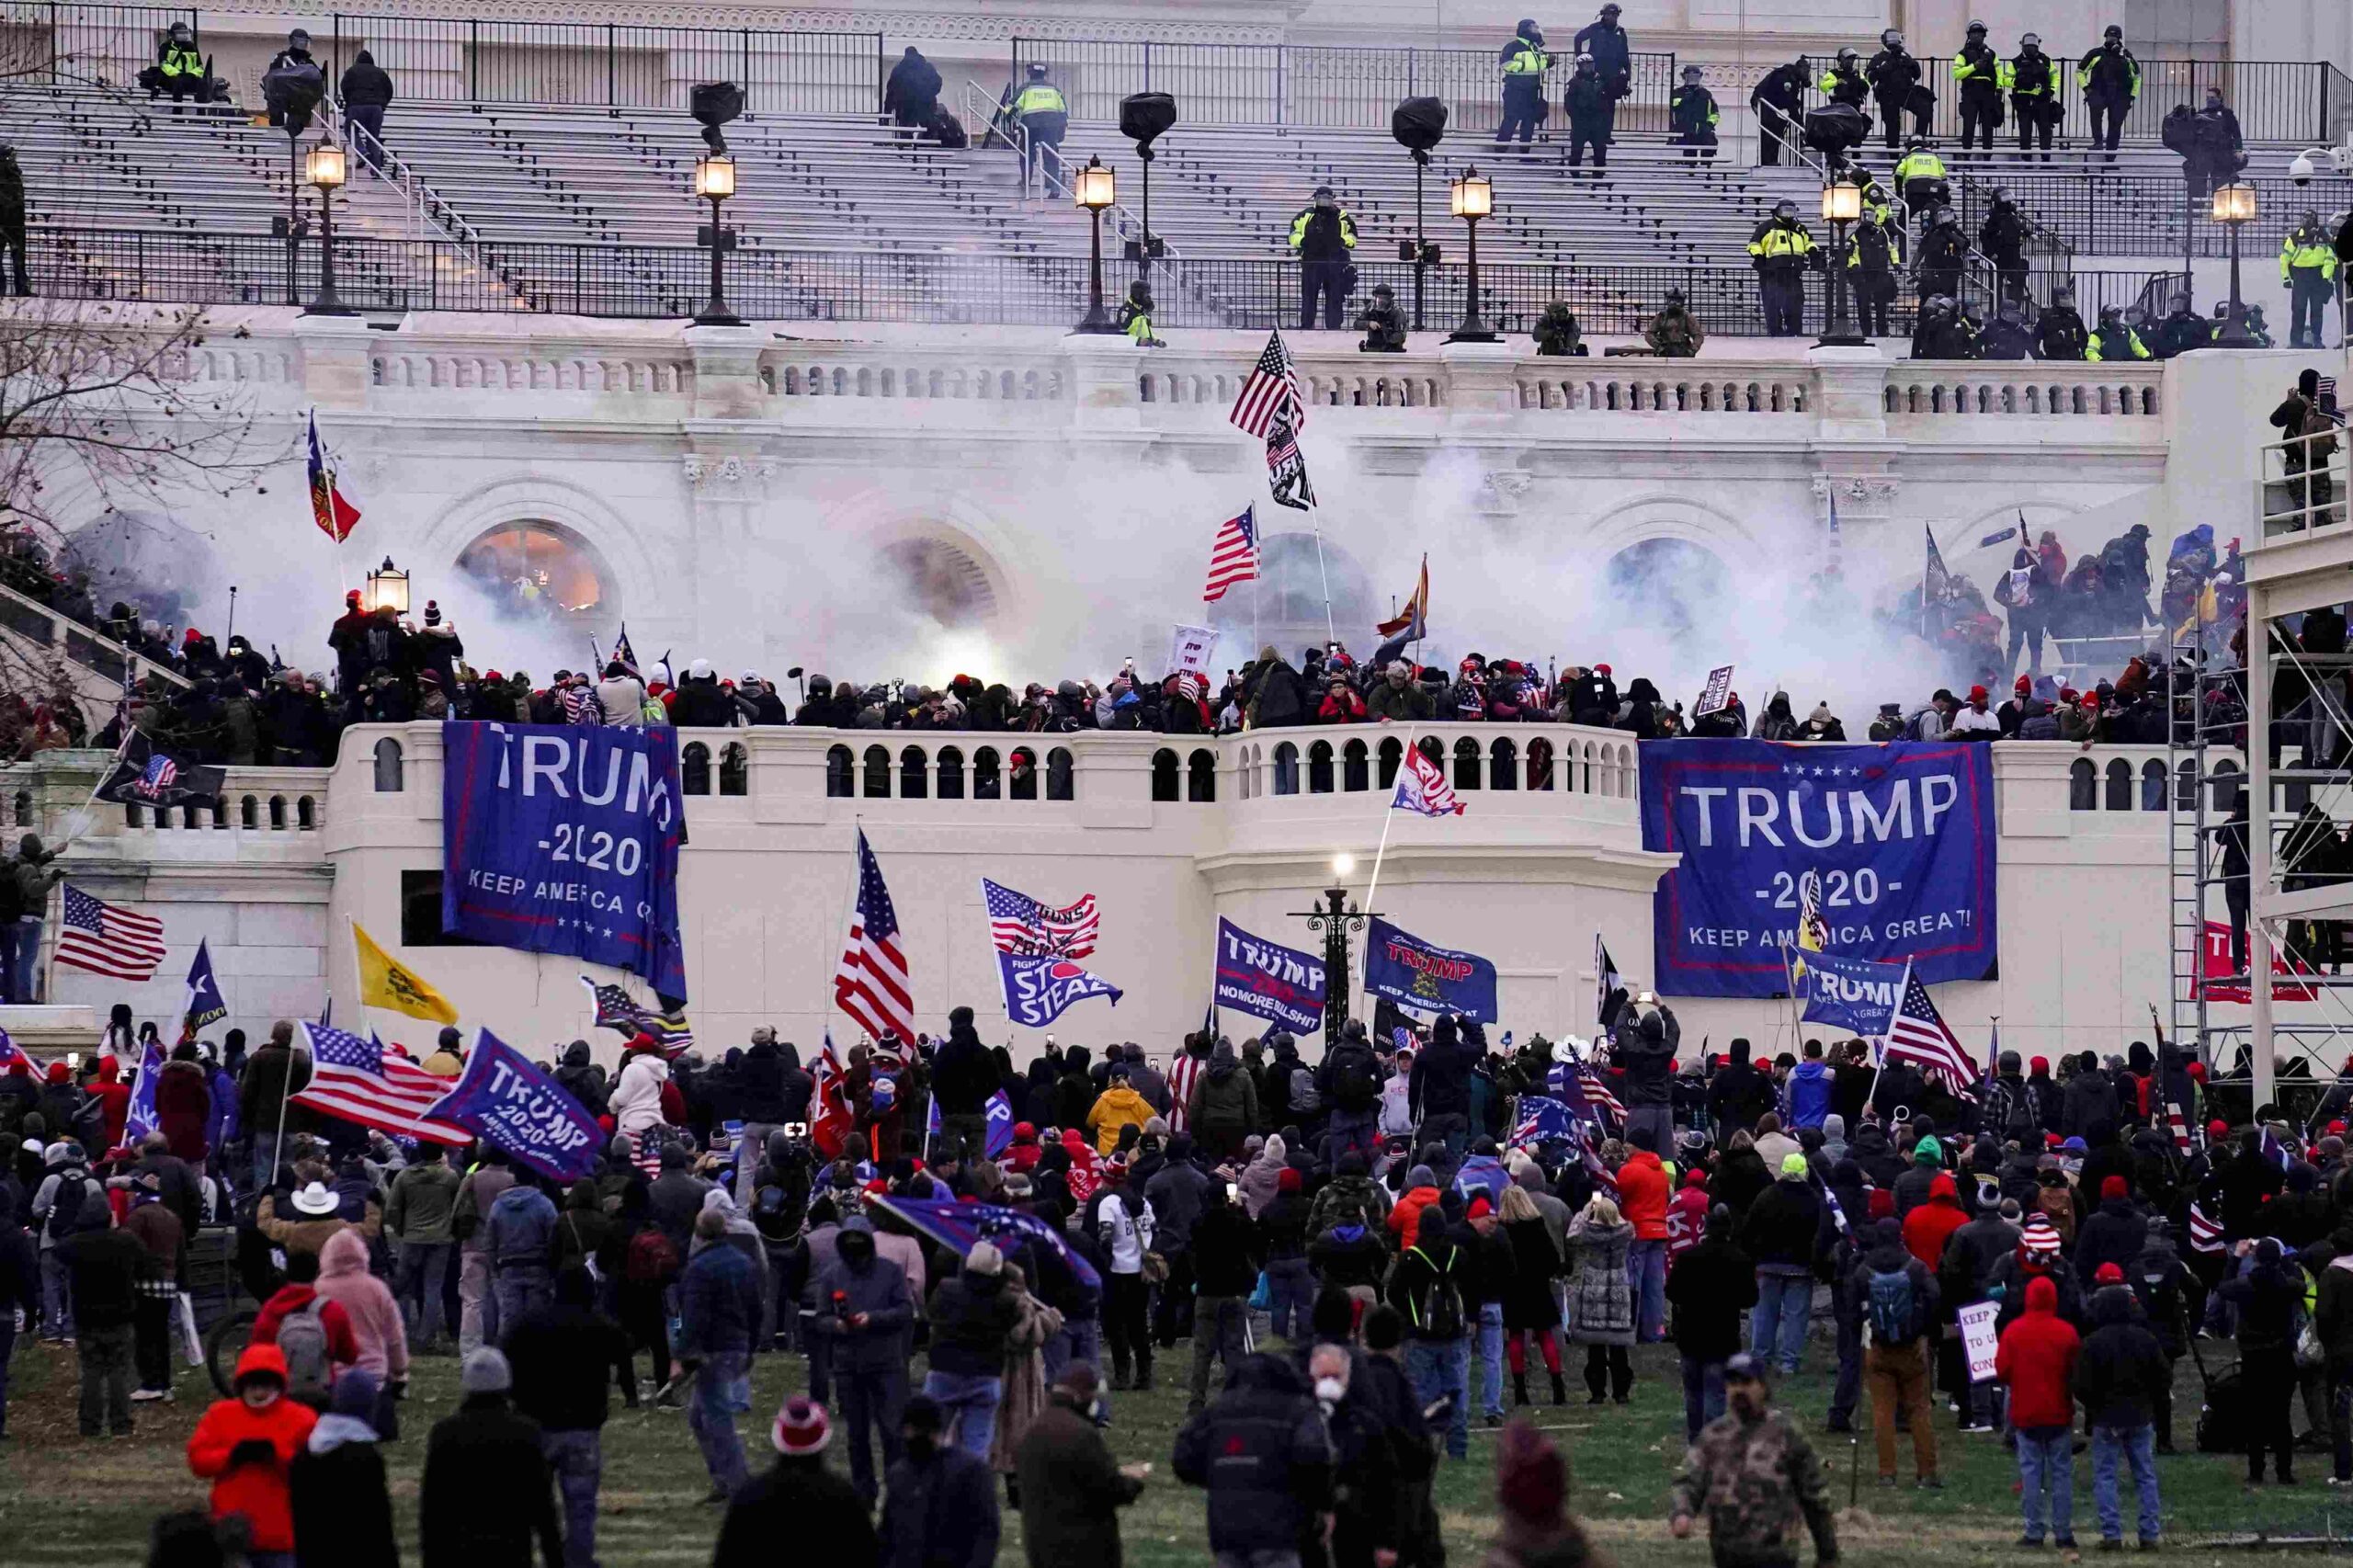 Donald Trump vowed that releasing individuals “wrongfully imprisoned” for the January 6 Capitol riot will be among his first acts if reelected. (AP Photo/John Minchillo, File)